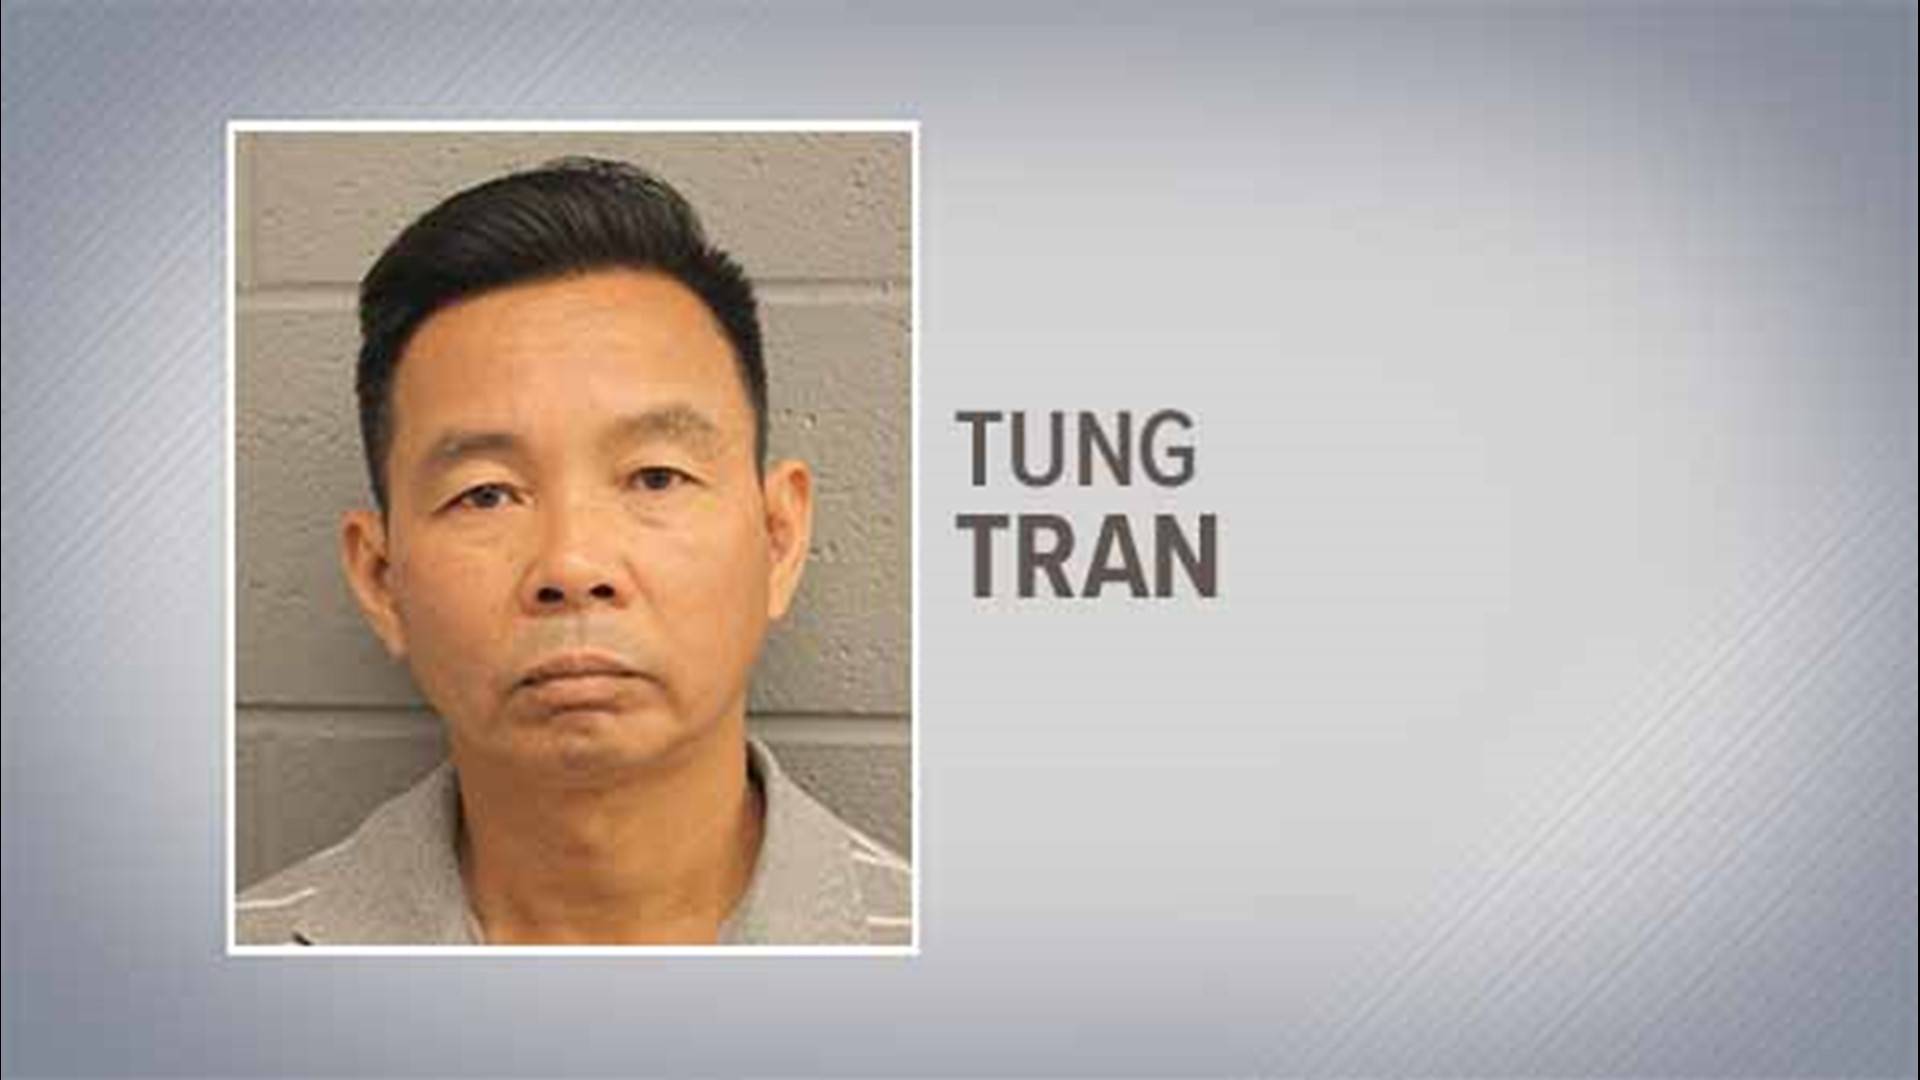 HPD Chief Troy Finner says Sgt. Tung Tran was immediately relieved of duty when the accusations were brought to his attention.